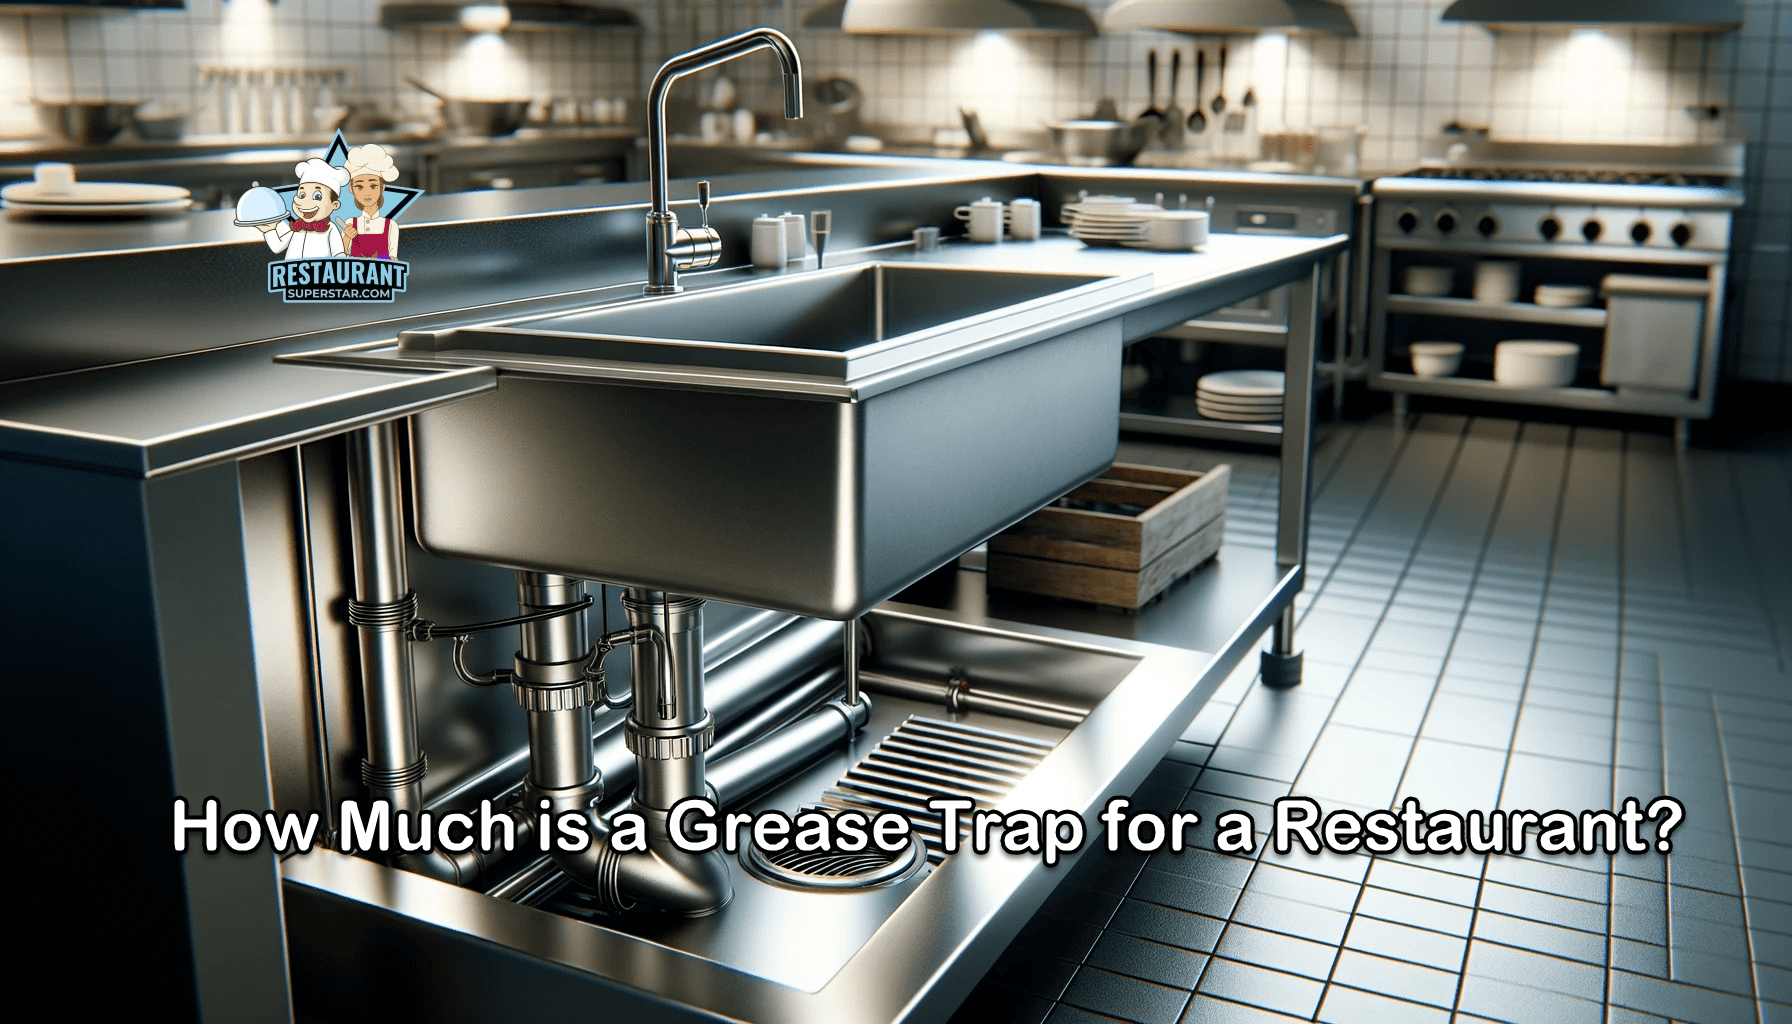 How Much is a Grease Trap for a Restaurant?